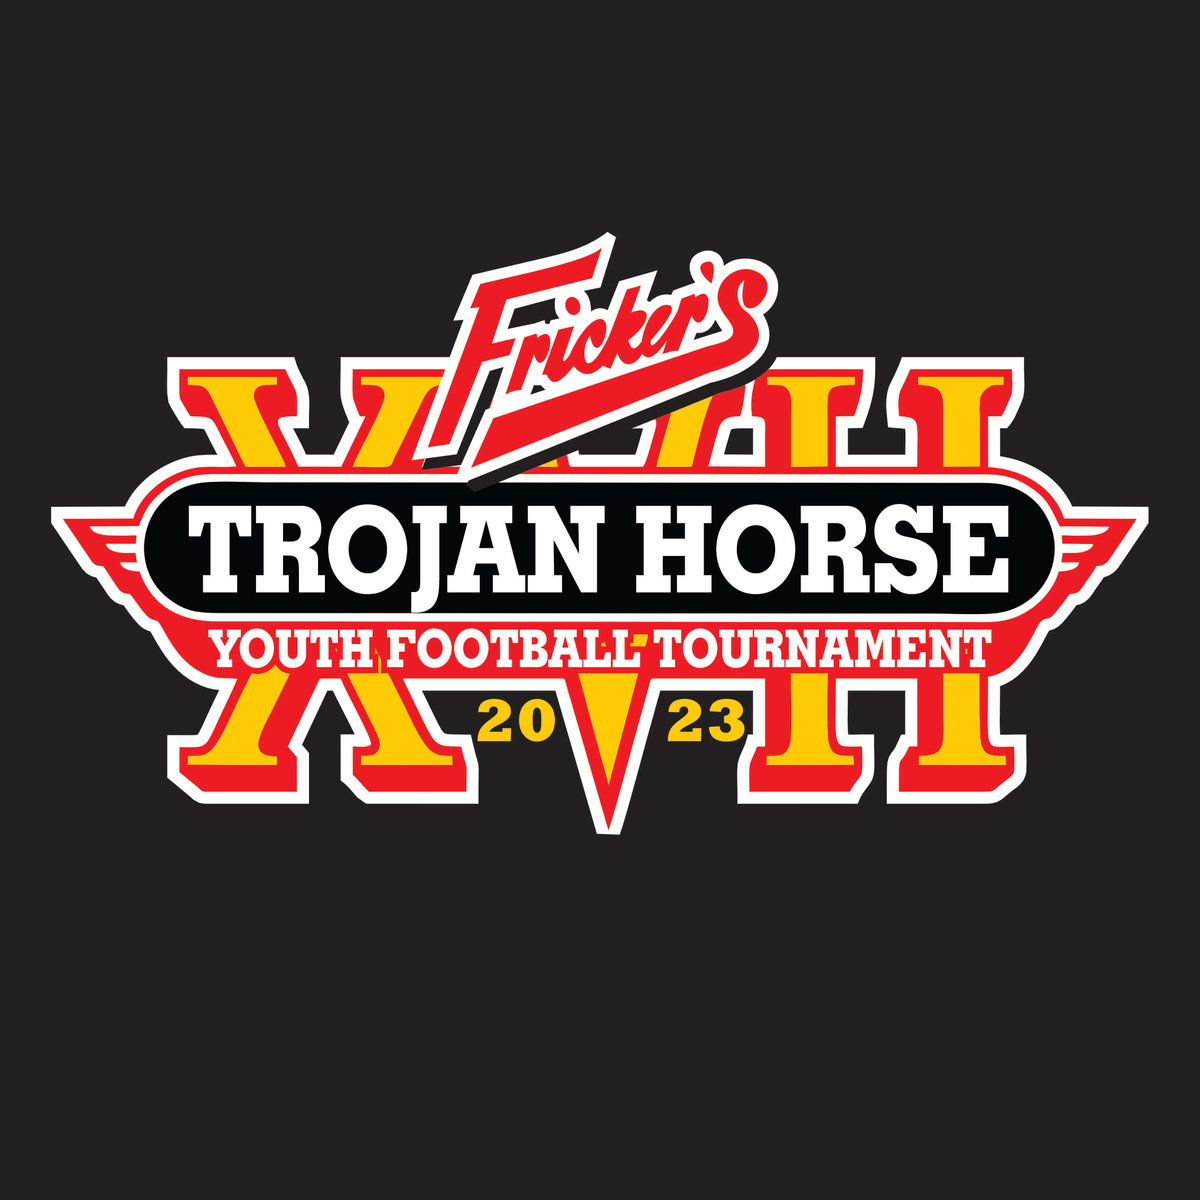 17th Annual Fricker's Trojan Horse Youth Football Tournament